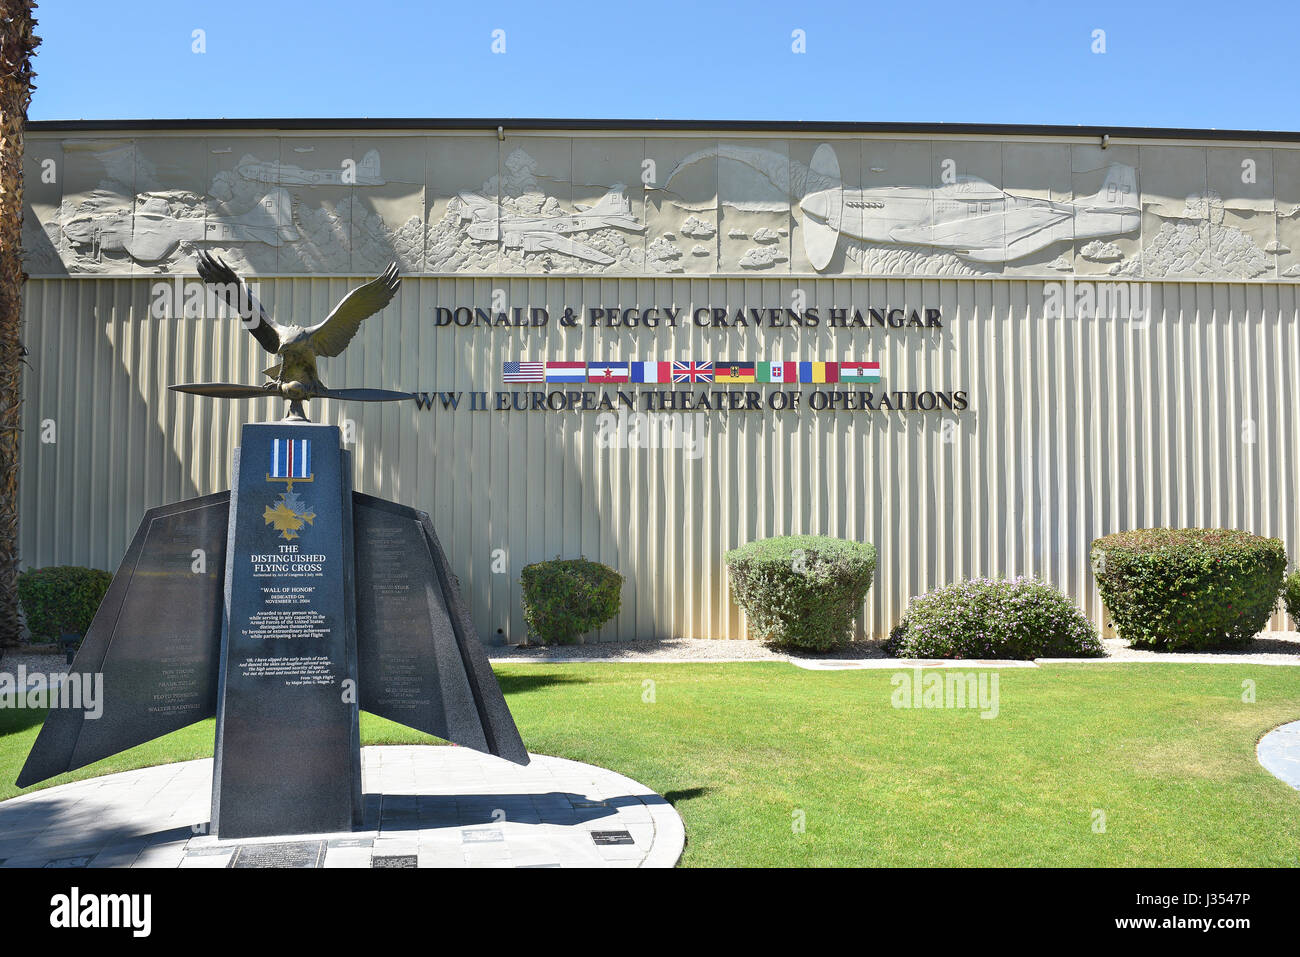 PALM Springs, California - MARZO 24, 2017: Palm Springs Air Museum Distinguished Flying Cross Memorial. Oltre centomila visitatori ogni anno il tour 65.000 Foto Stock